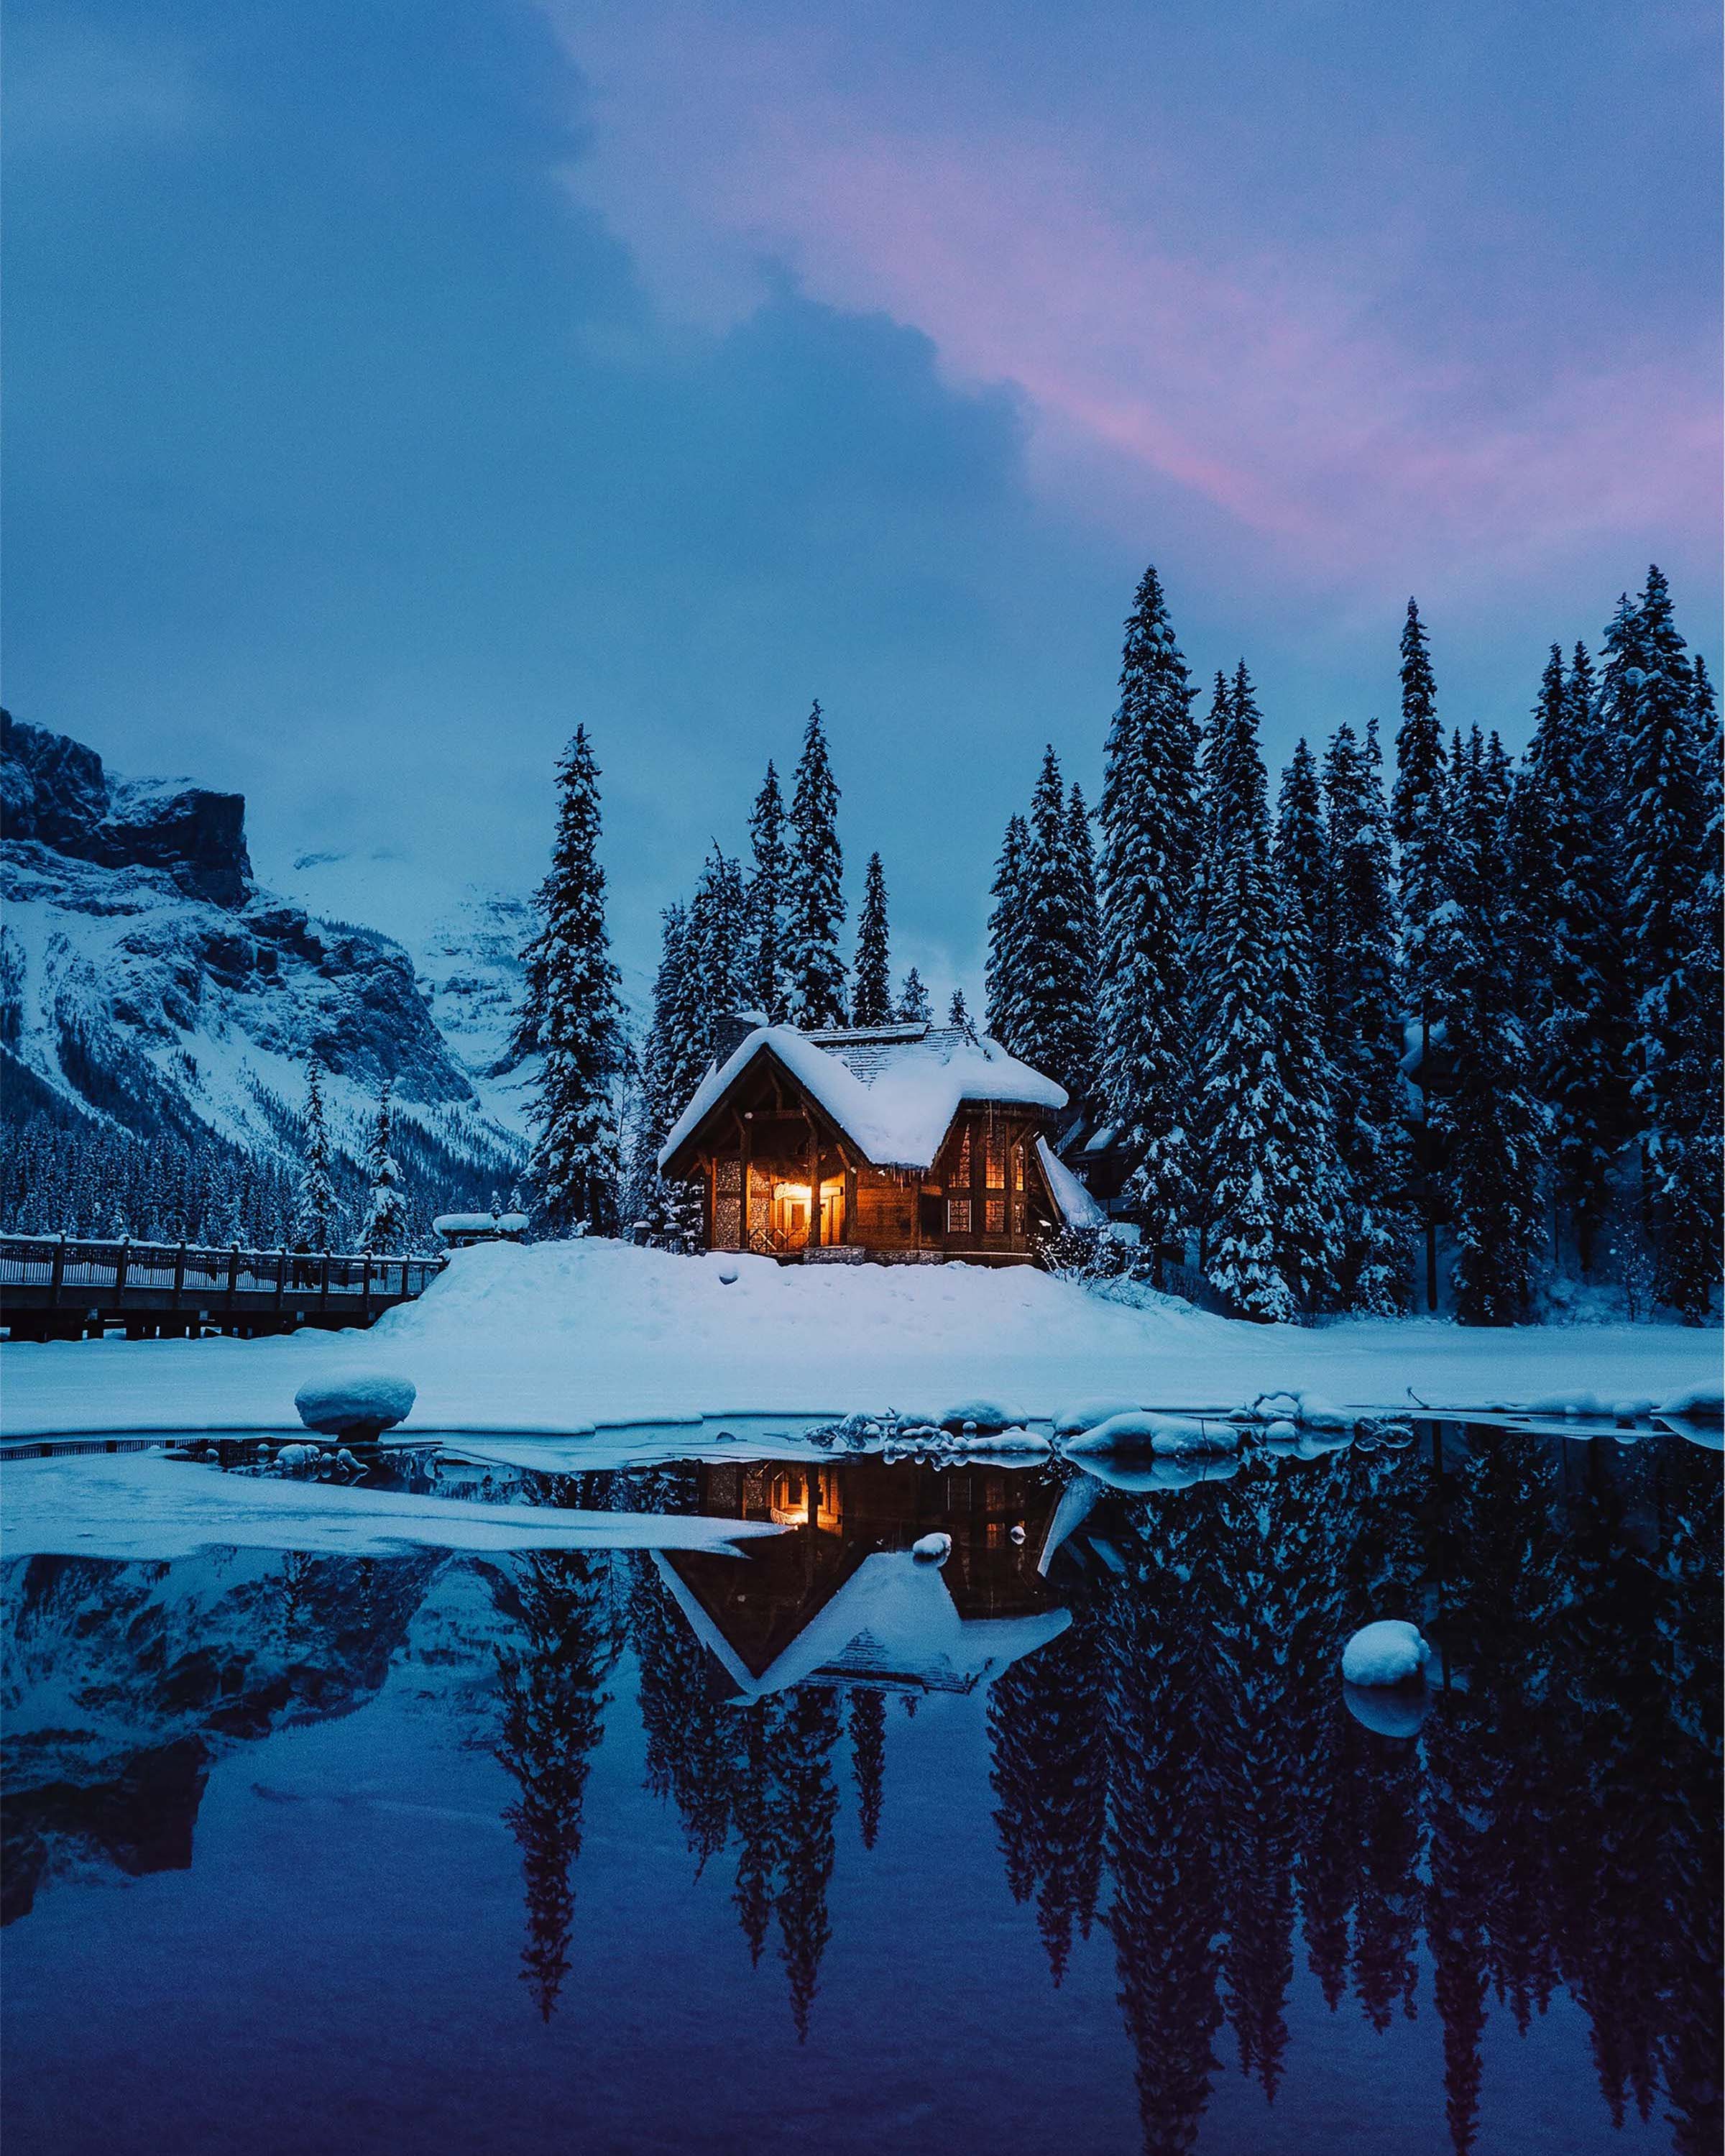 A cozy log cabin in the middle of an snowy forest with a lake in the foreground